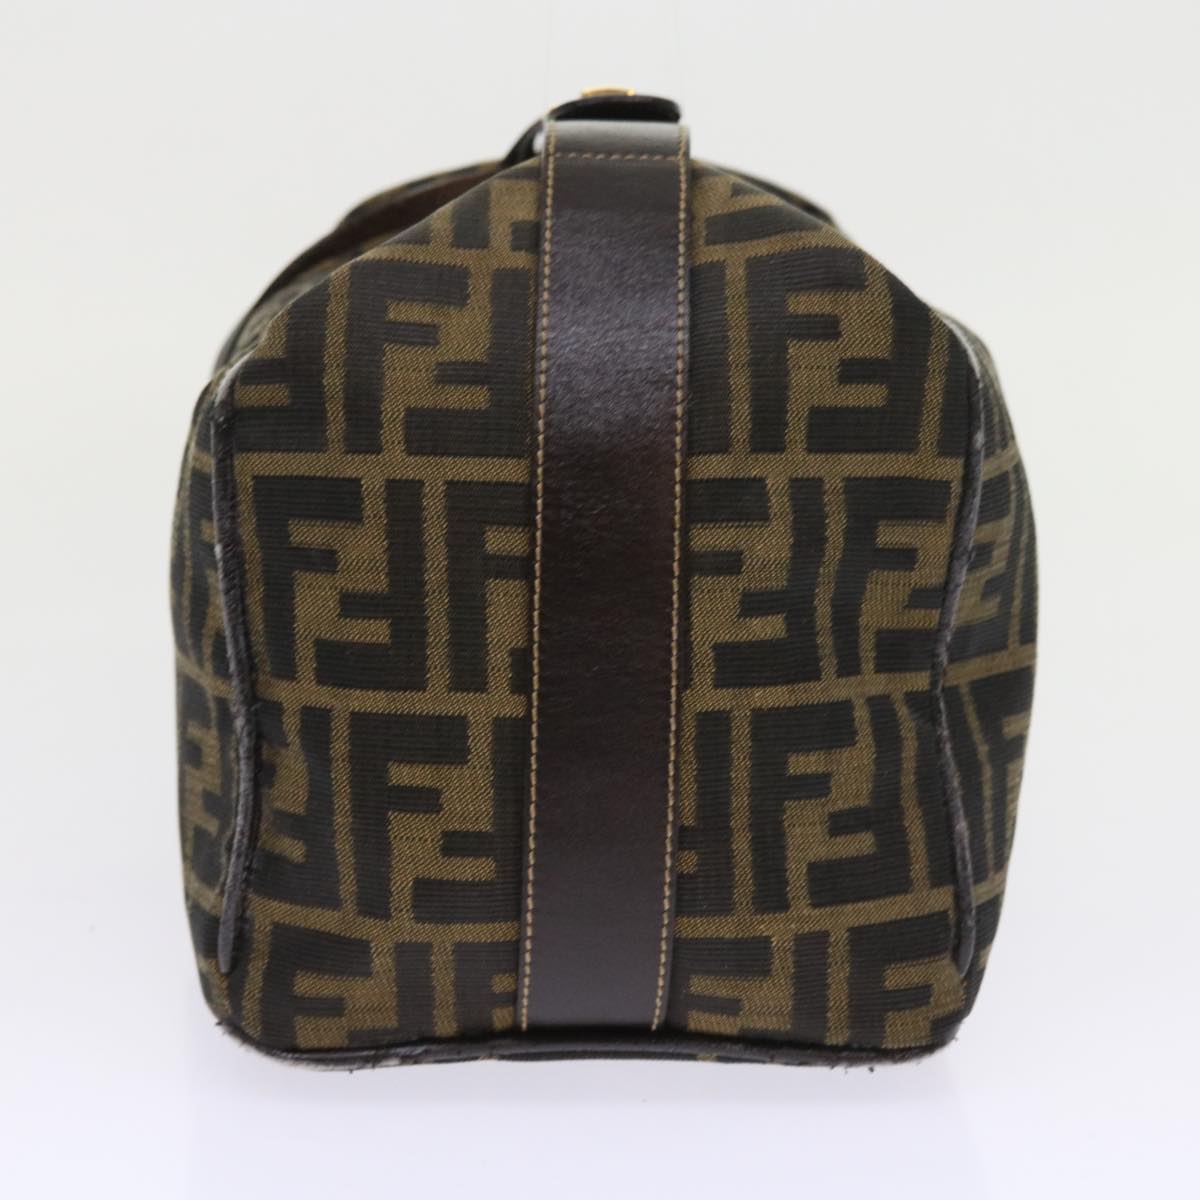 FENDI Zucca Canvas Vanity Cosmetic Pouch Black Brown Auth 57793